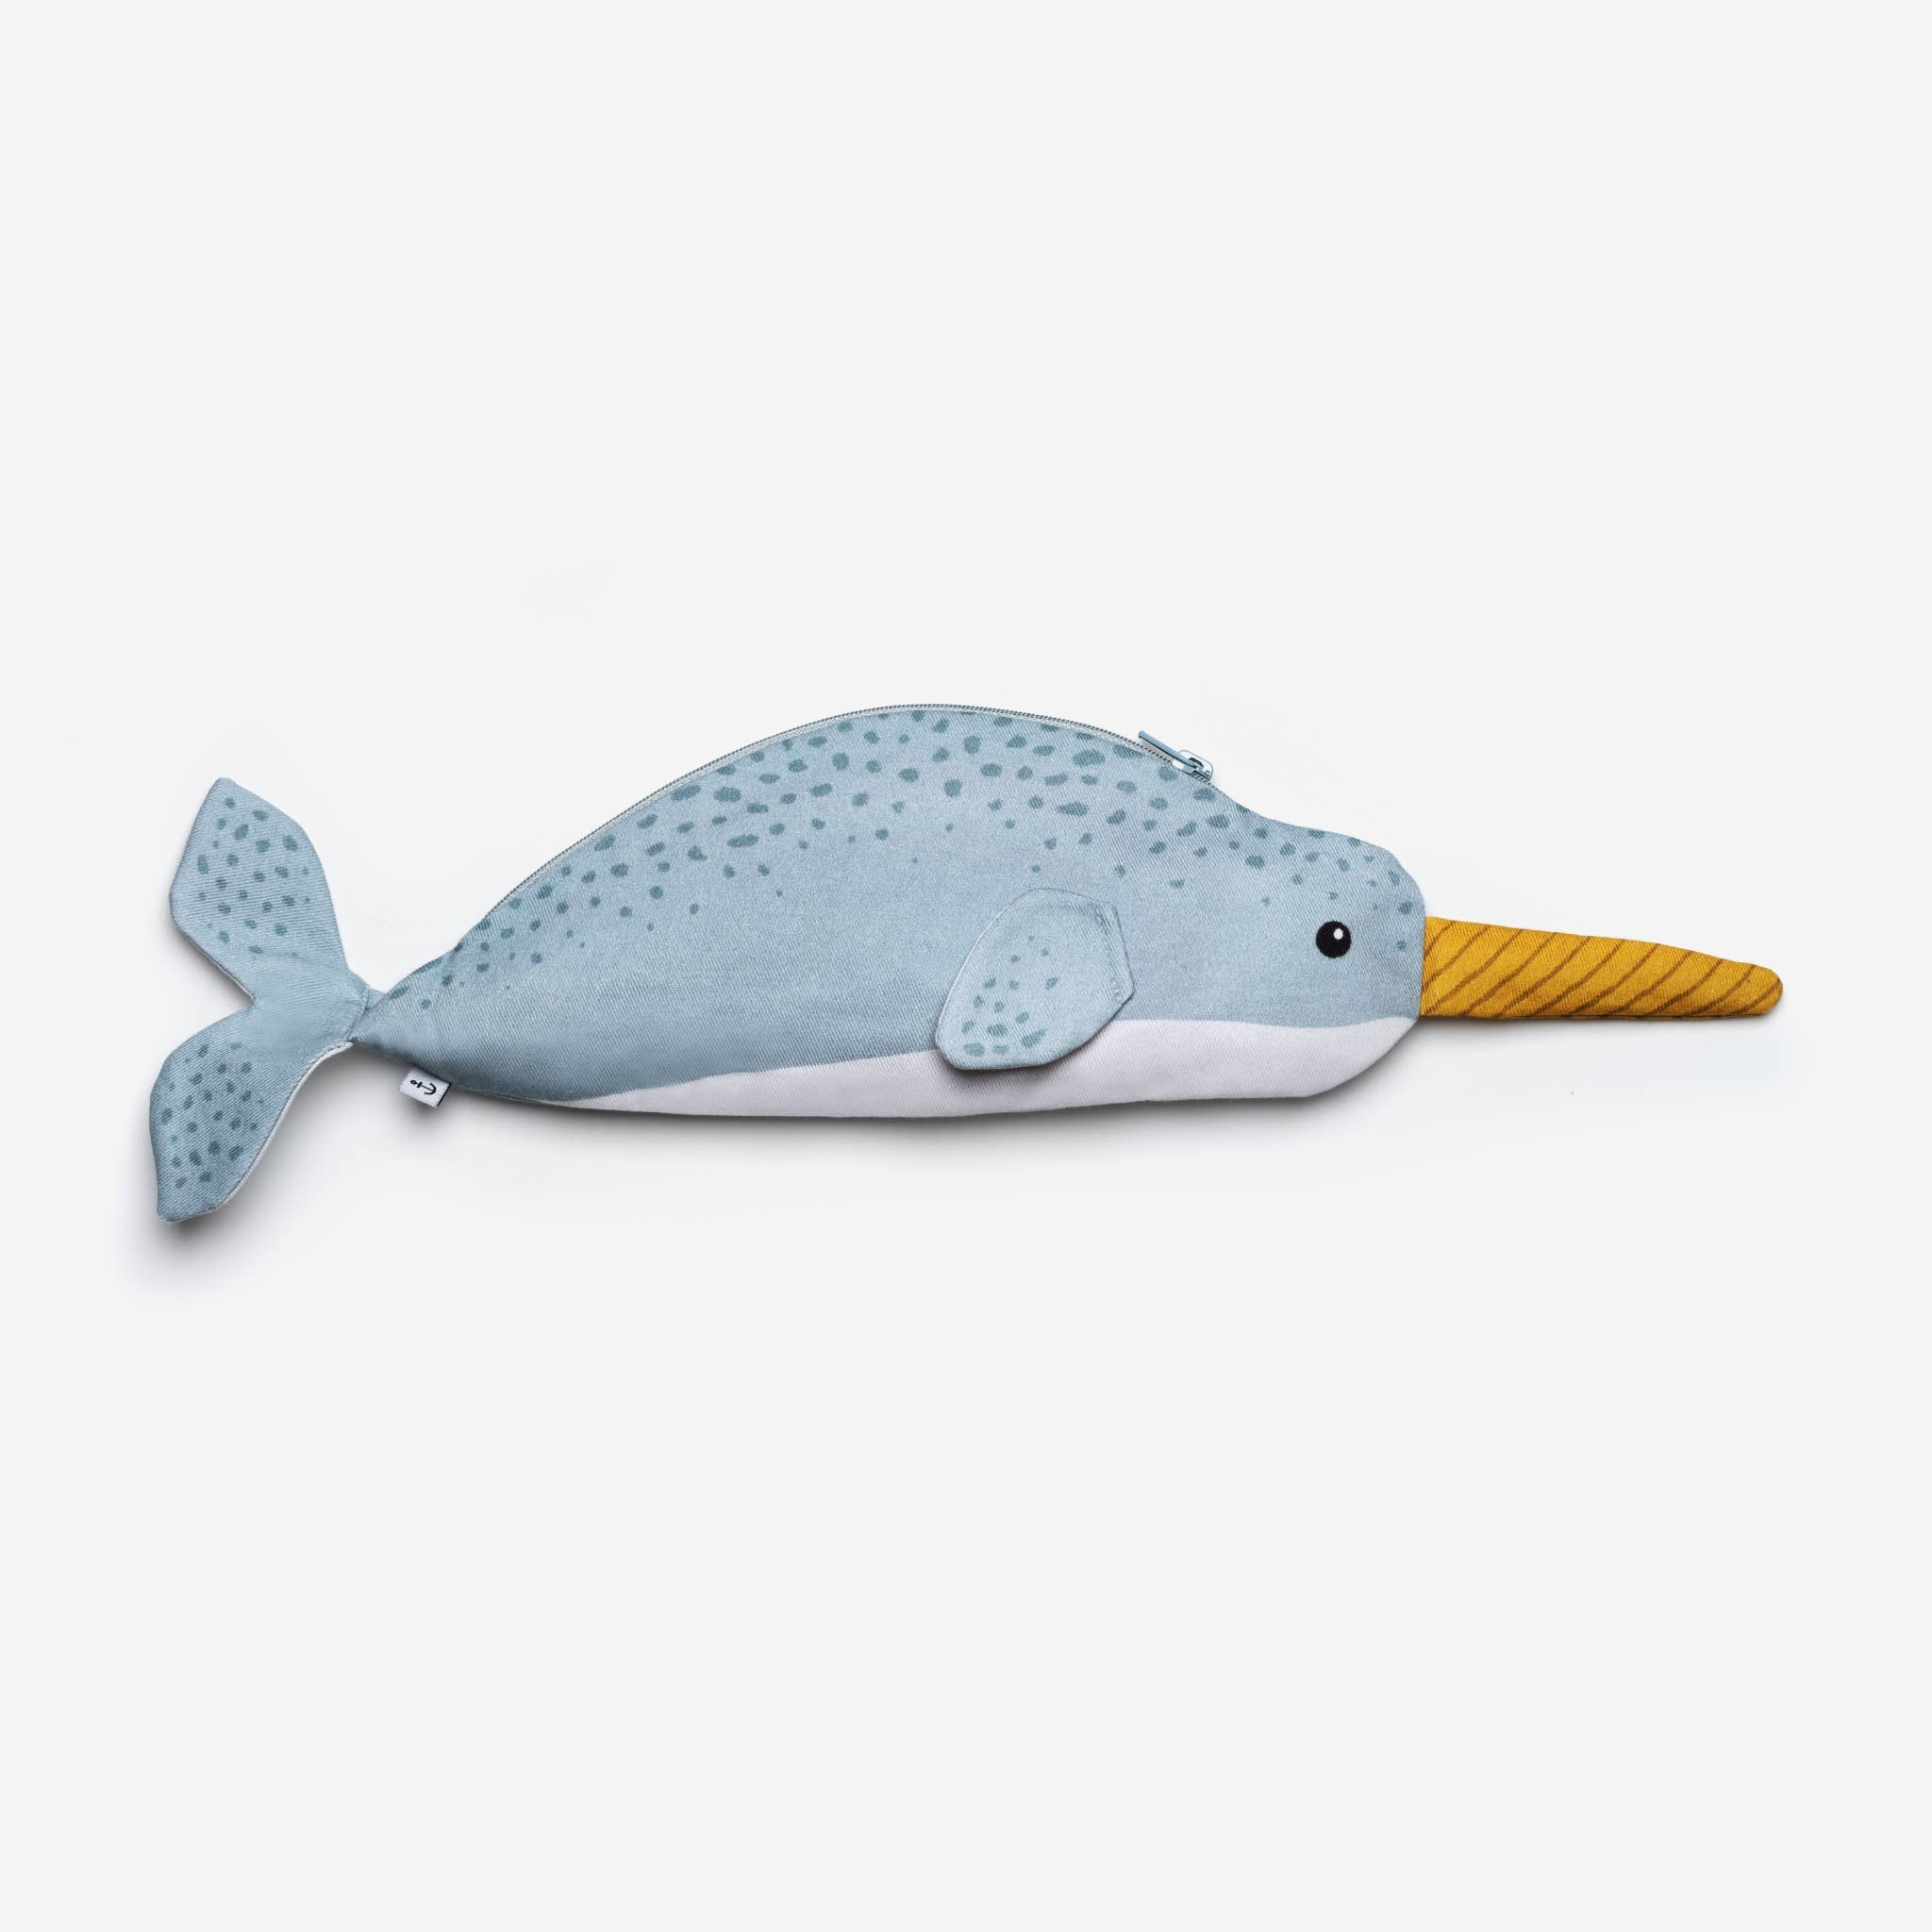 Narwhal case